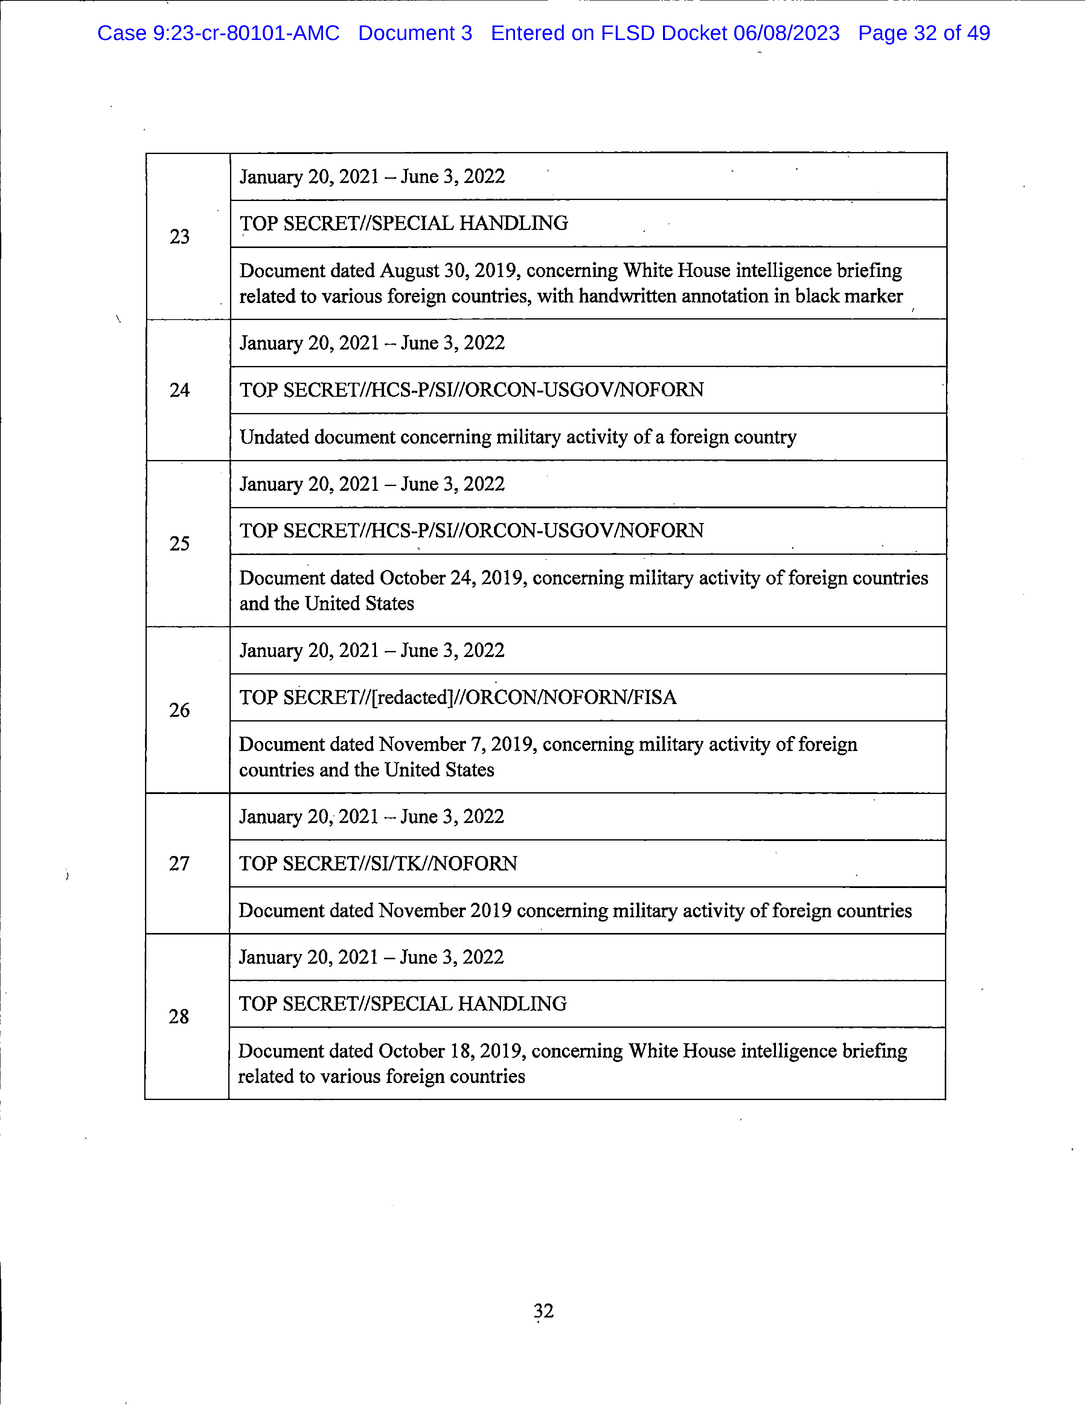 Page 32 of Donald Trump Classified Documents Indictment PDF document.